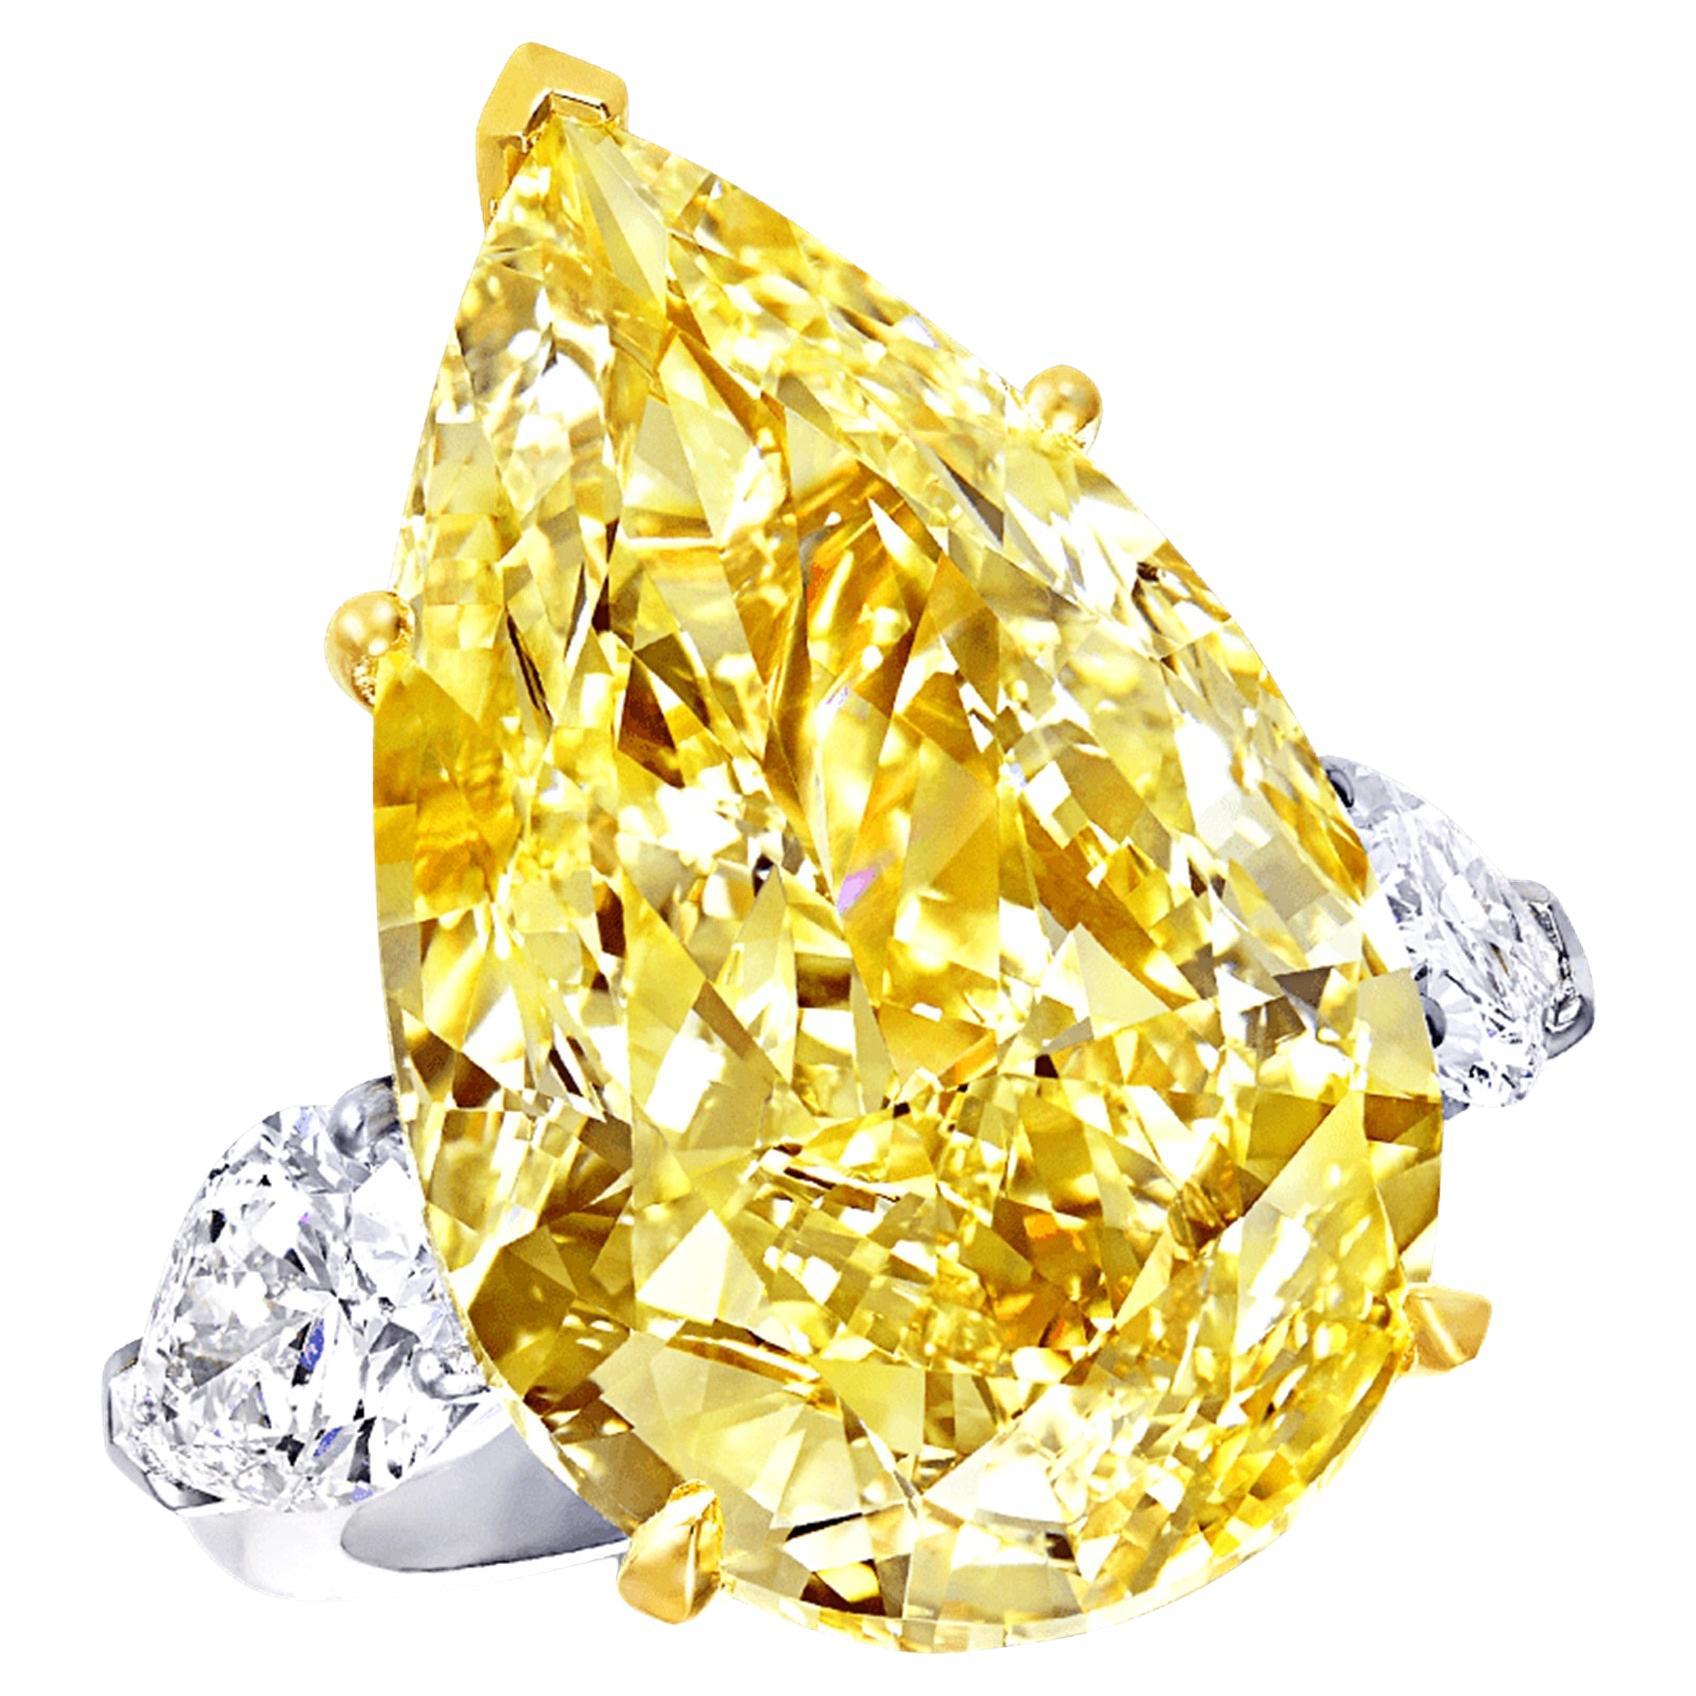 A GIA certified Fancy Intense Yellow 11-carat pear-shaped three-stone diamond ring would be an exceptional piece of jewelry. The GIA certification ensures its authenticity and quality, having been rigorously graded based on the 4Cs. The term 